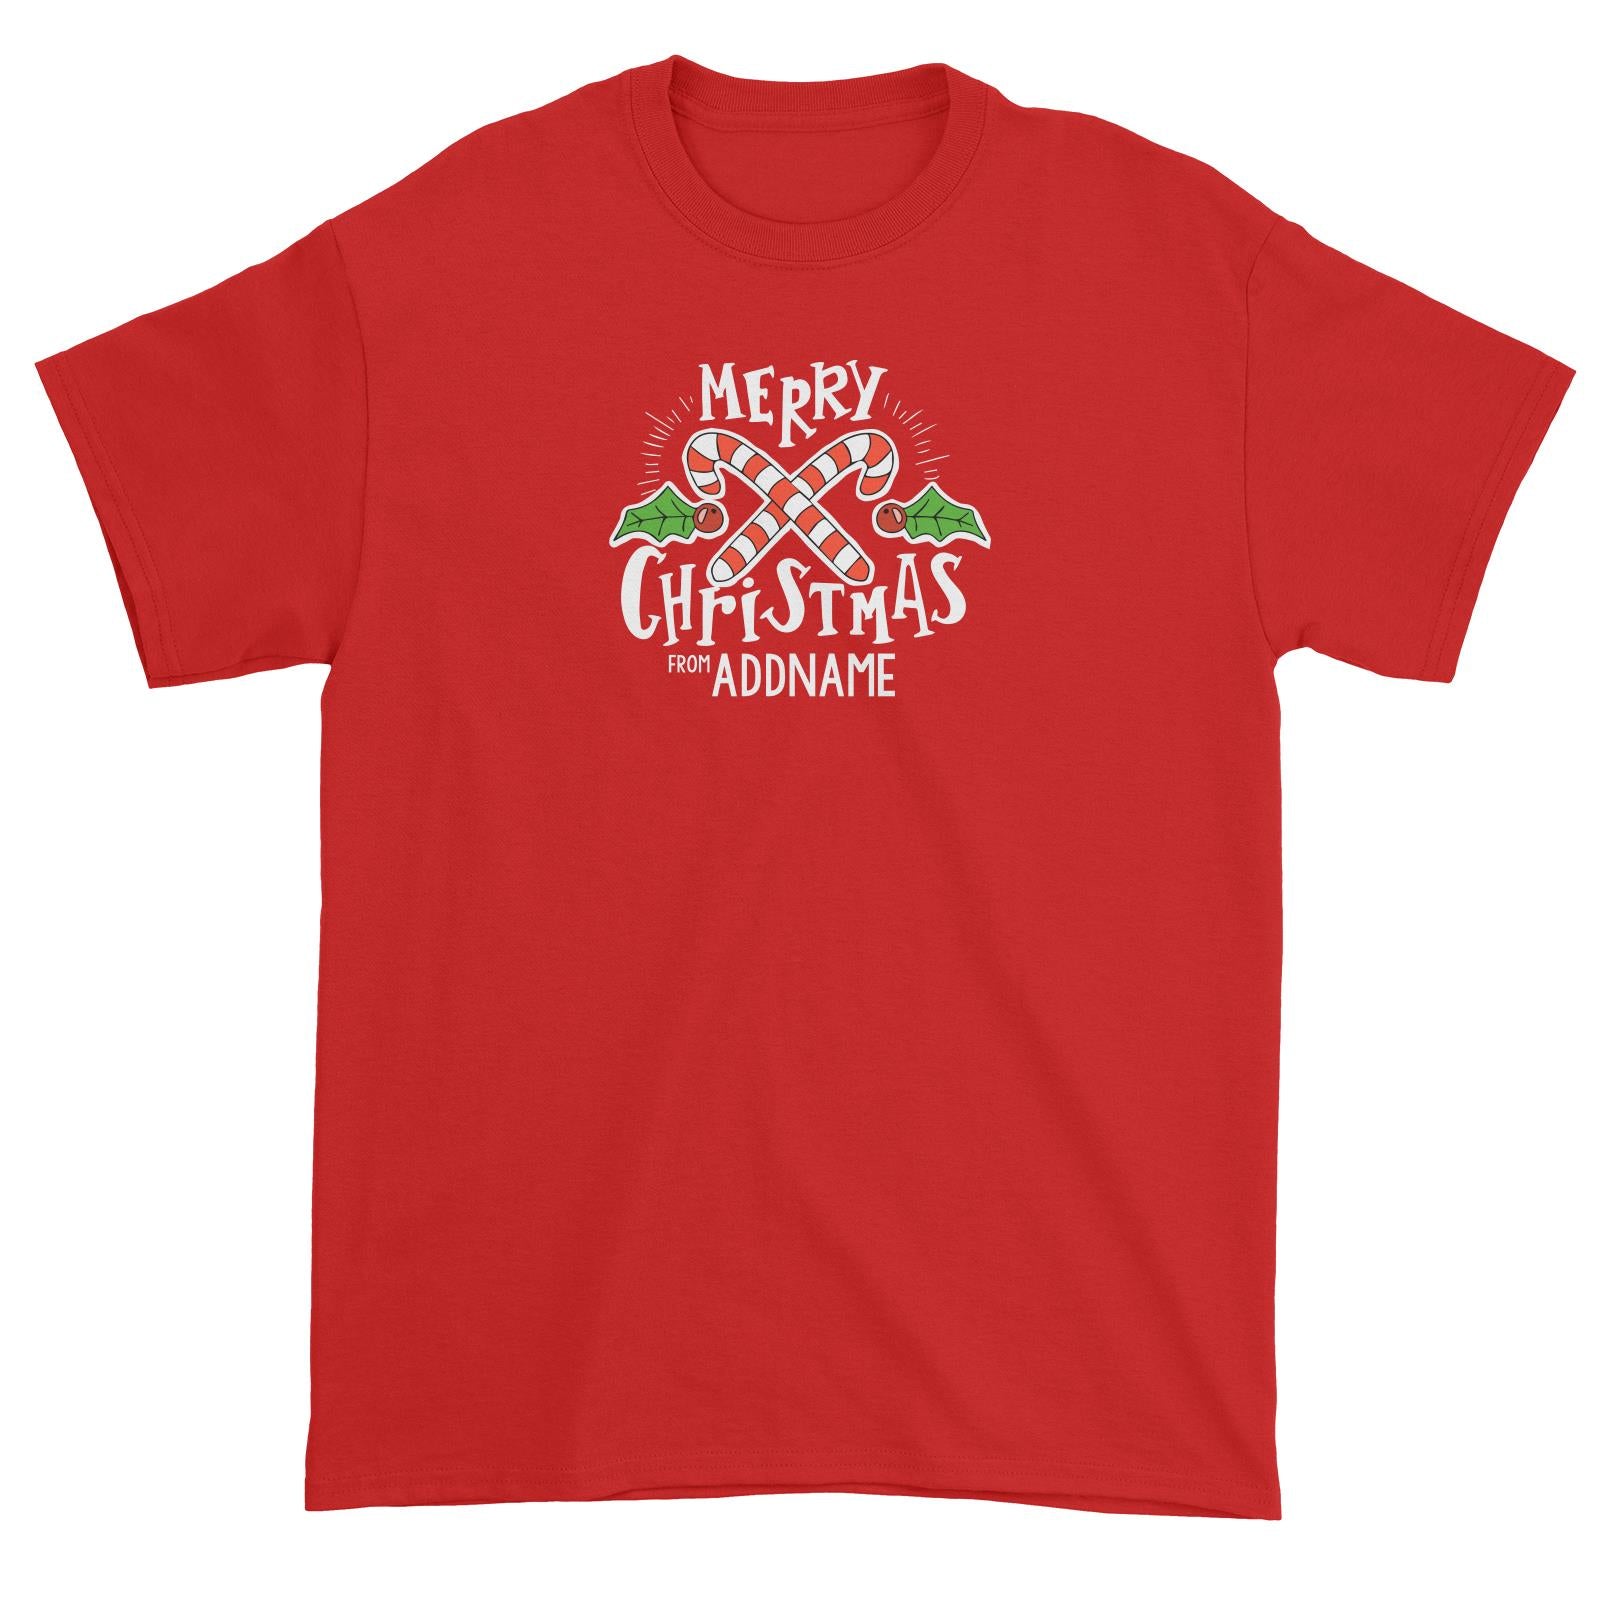 Merry Chrismas with Holly and Candy Cane Greeting Addname Unisex T-Shirt Christmas Matching Family Personalizable Designs Lettering